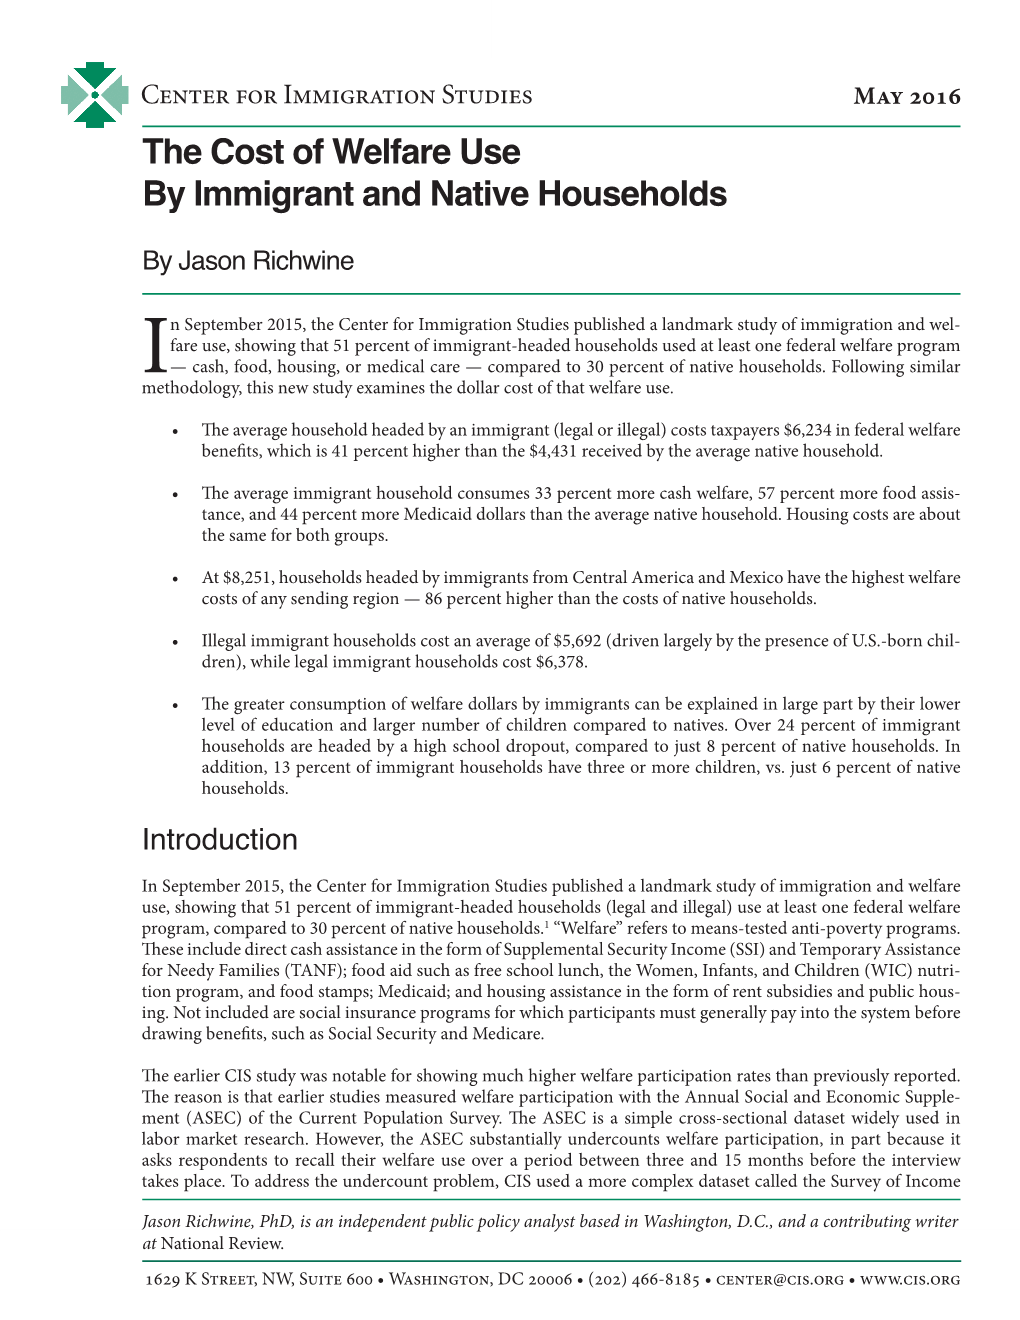 The Cost of Welfare Use by Immigrant and Native Households